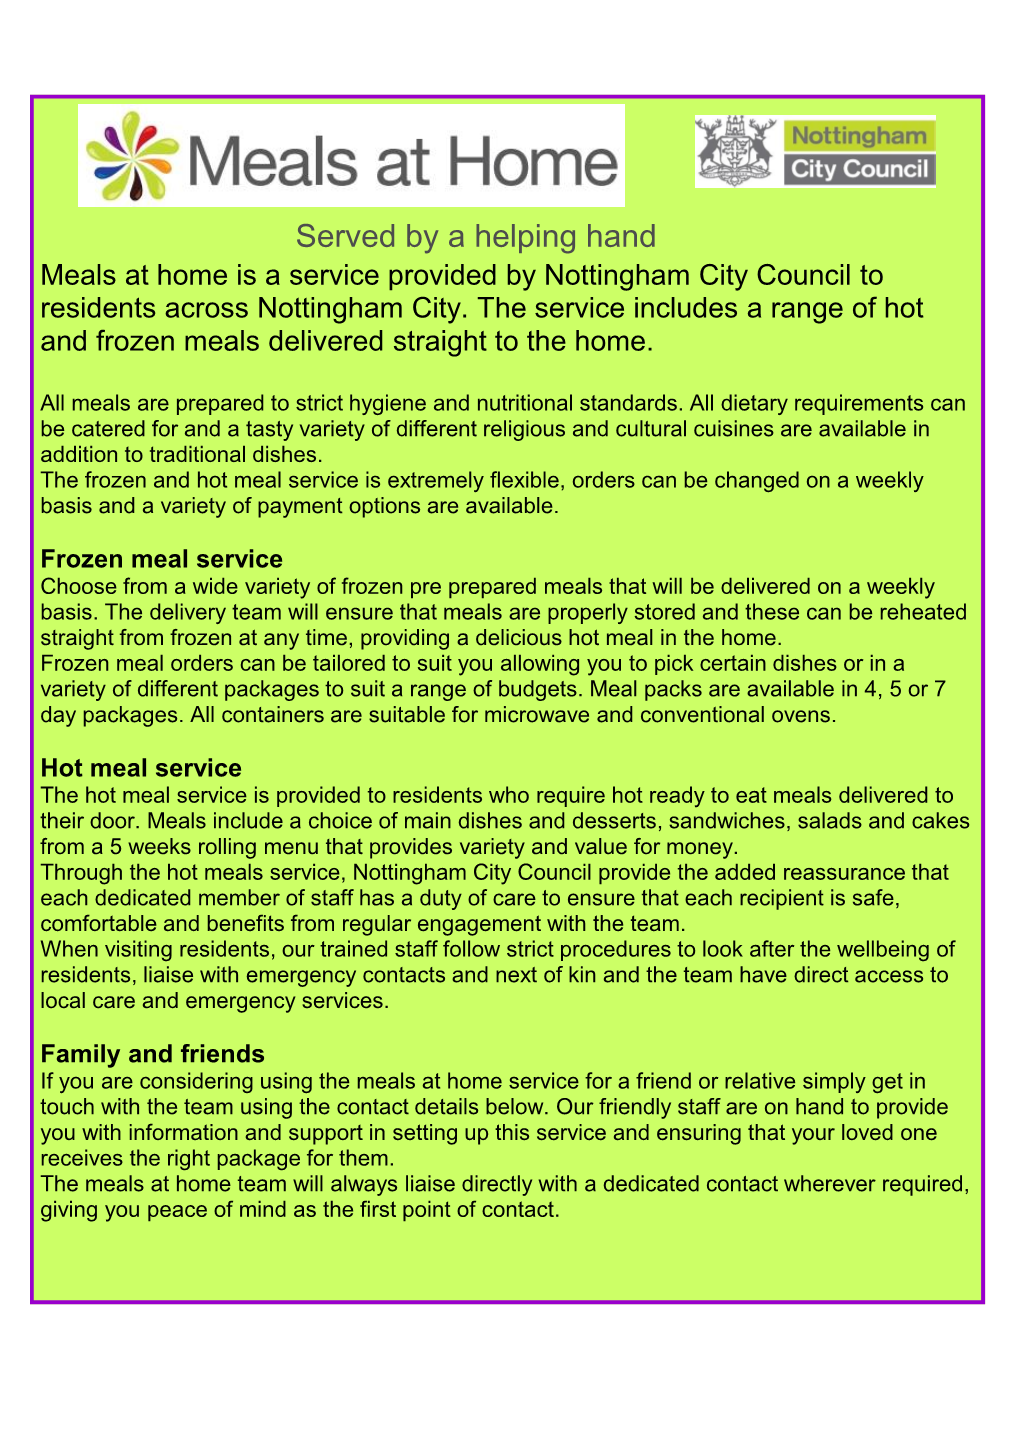 Served by a Helping Hand Meals at Home Is a Service Provided by Nottingham City Council to Residents Across Nottingham City